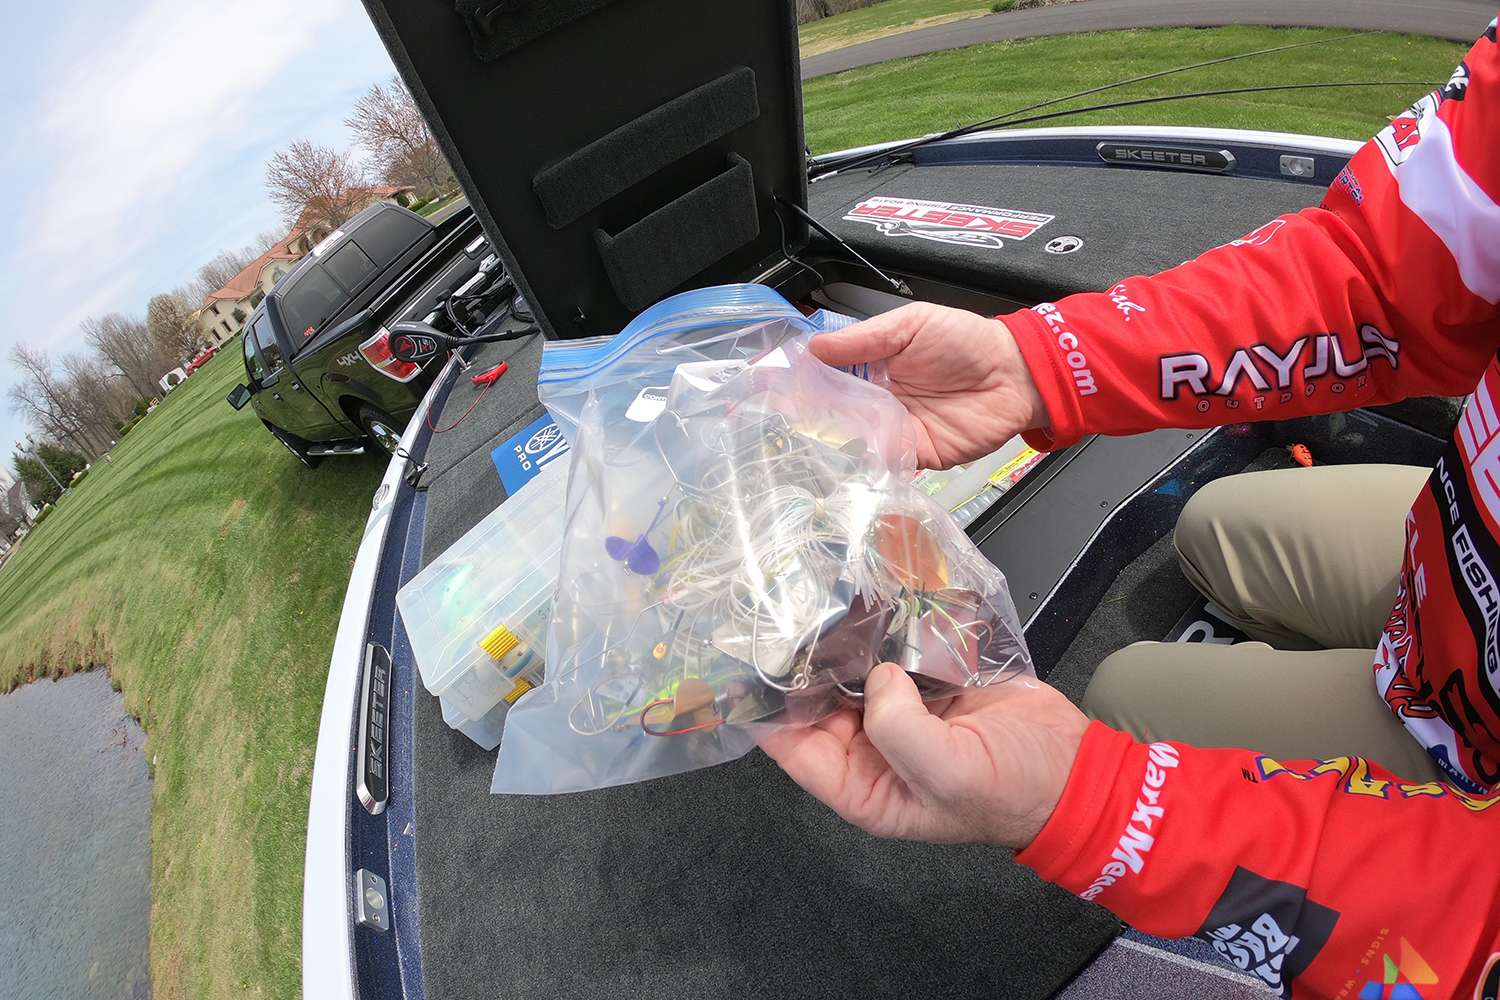 He keeps his buzzbaits in a Ziploc bag, which makes a lot of sense considering those are lures that just don't store very well. 